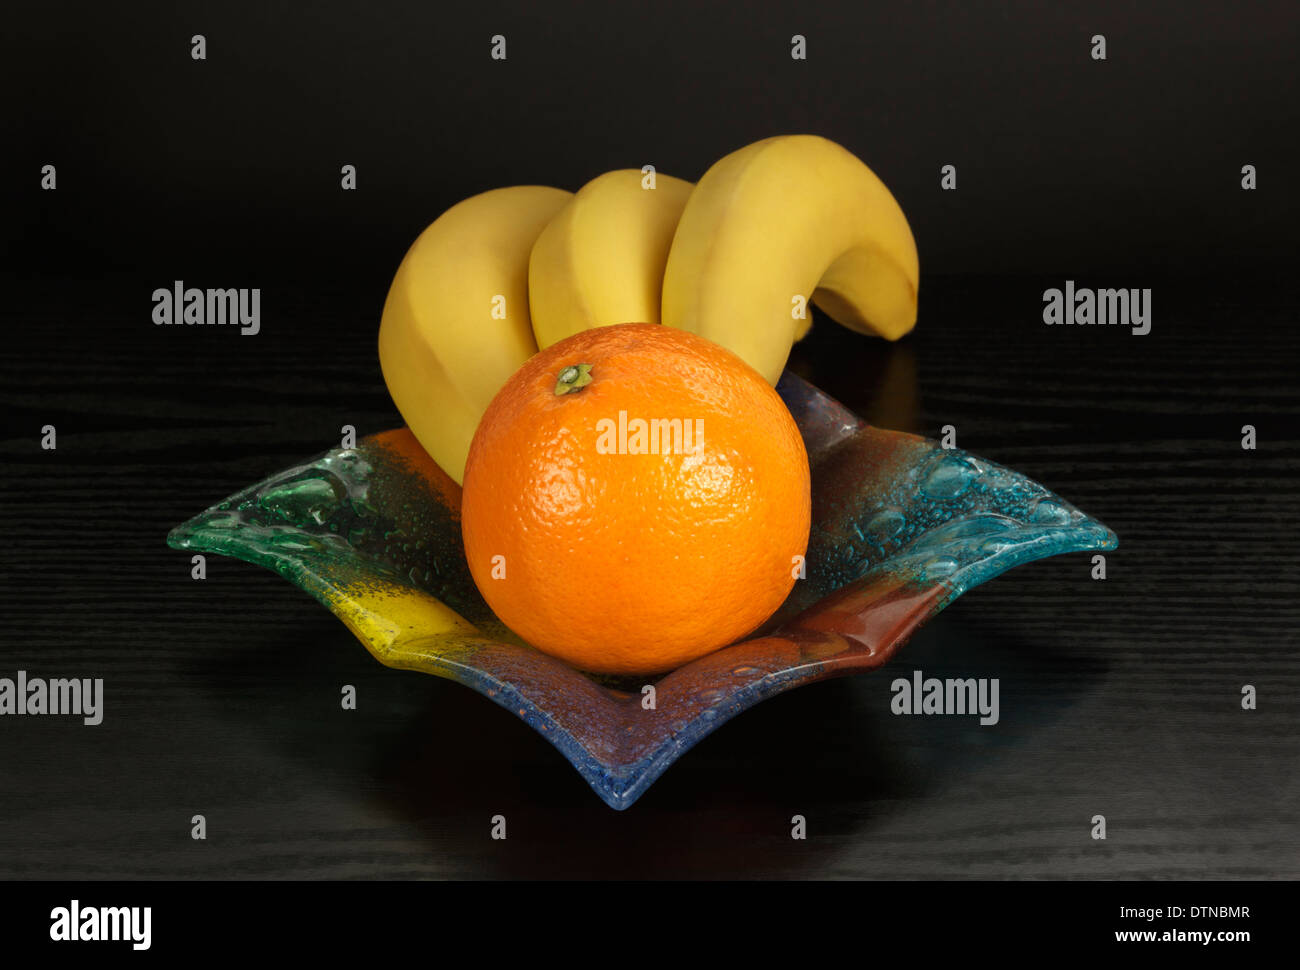 Bananas and orange in colored glass bowl Stock Photo